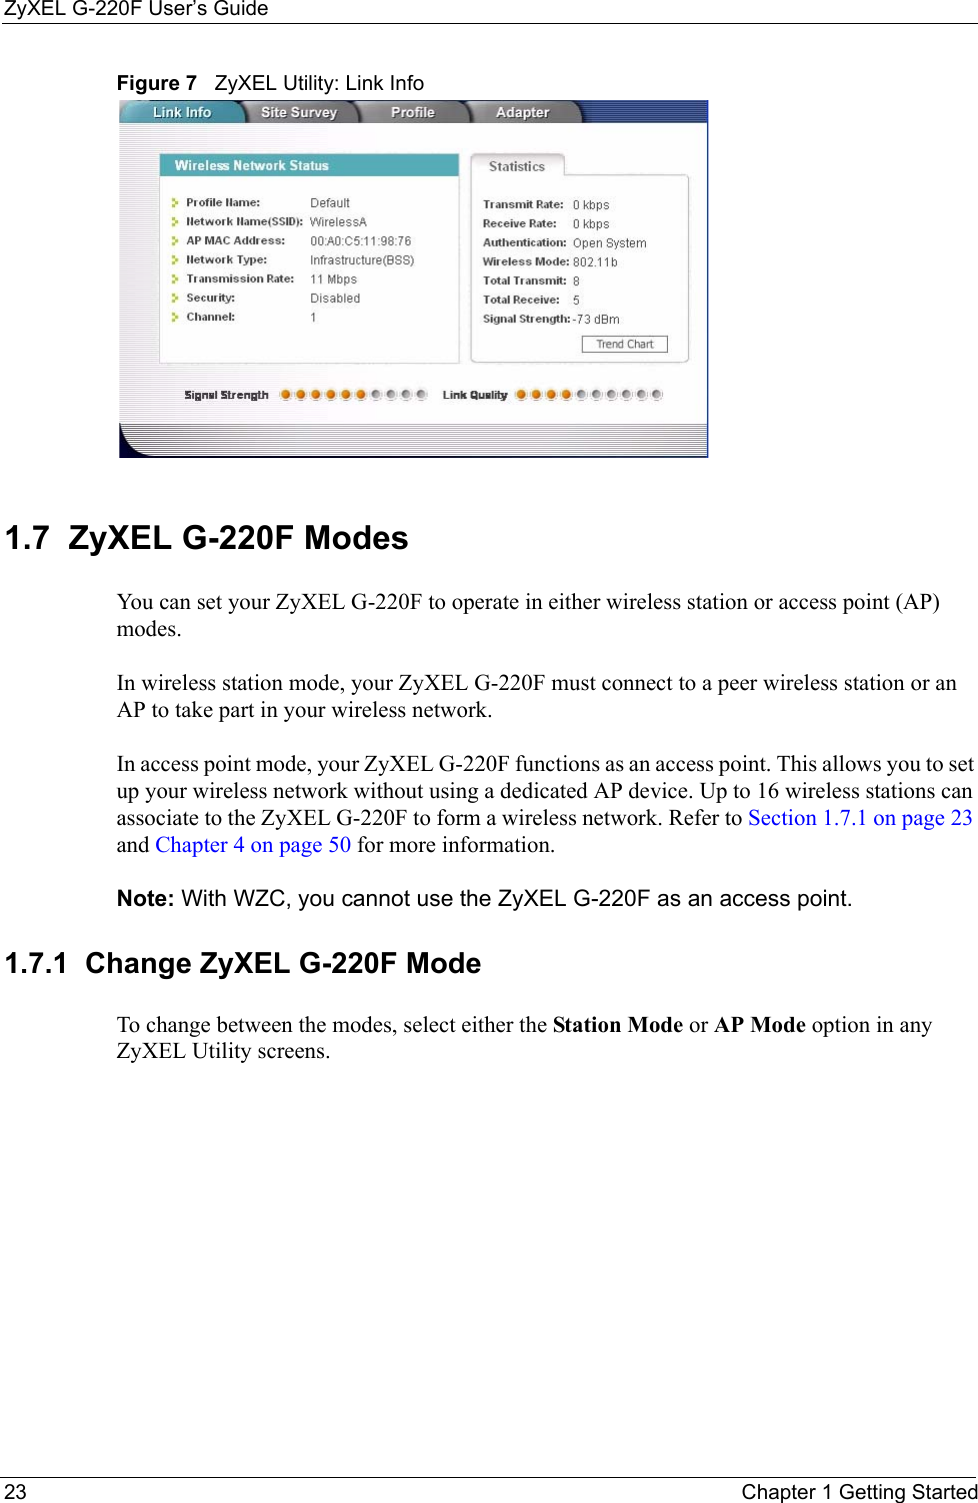 ZyXEL G-220F User’s Guide23 Chapter 1 Getting StartedFigure 7   ZyXEL Utility: Link Info 1.7  ZyXEL G-220F Modes    You can set your ZyXEL G-220F to operate in either wireless station or access point (AP) modes. In wireless station mode, your ZyXEL G-220F must connect to a peer wireless station or an AP to take part in your wireless network.In access point mode, your ZyXEL G-220F functions as an access point. This allows you to set up your wireless network without using a dedicated AP device. Up to 16 wireless stations can associate to the ZyXEL G-220F to form a wireless network. Refer to Section 1.7.1 on page 23 and Chapter 4 on page 50 for more information.Note: With WZC, you cannot use the ZyXEL G-220F as an access point.1.7.1  Change ZyXEL G-220F Mode  To change between the modes, select either the Station Mode or AP Mode option in any ZyXEL Utility screens.